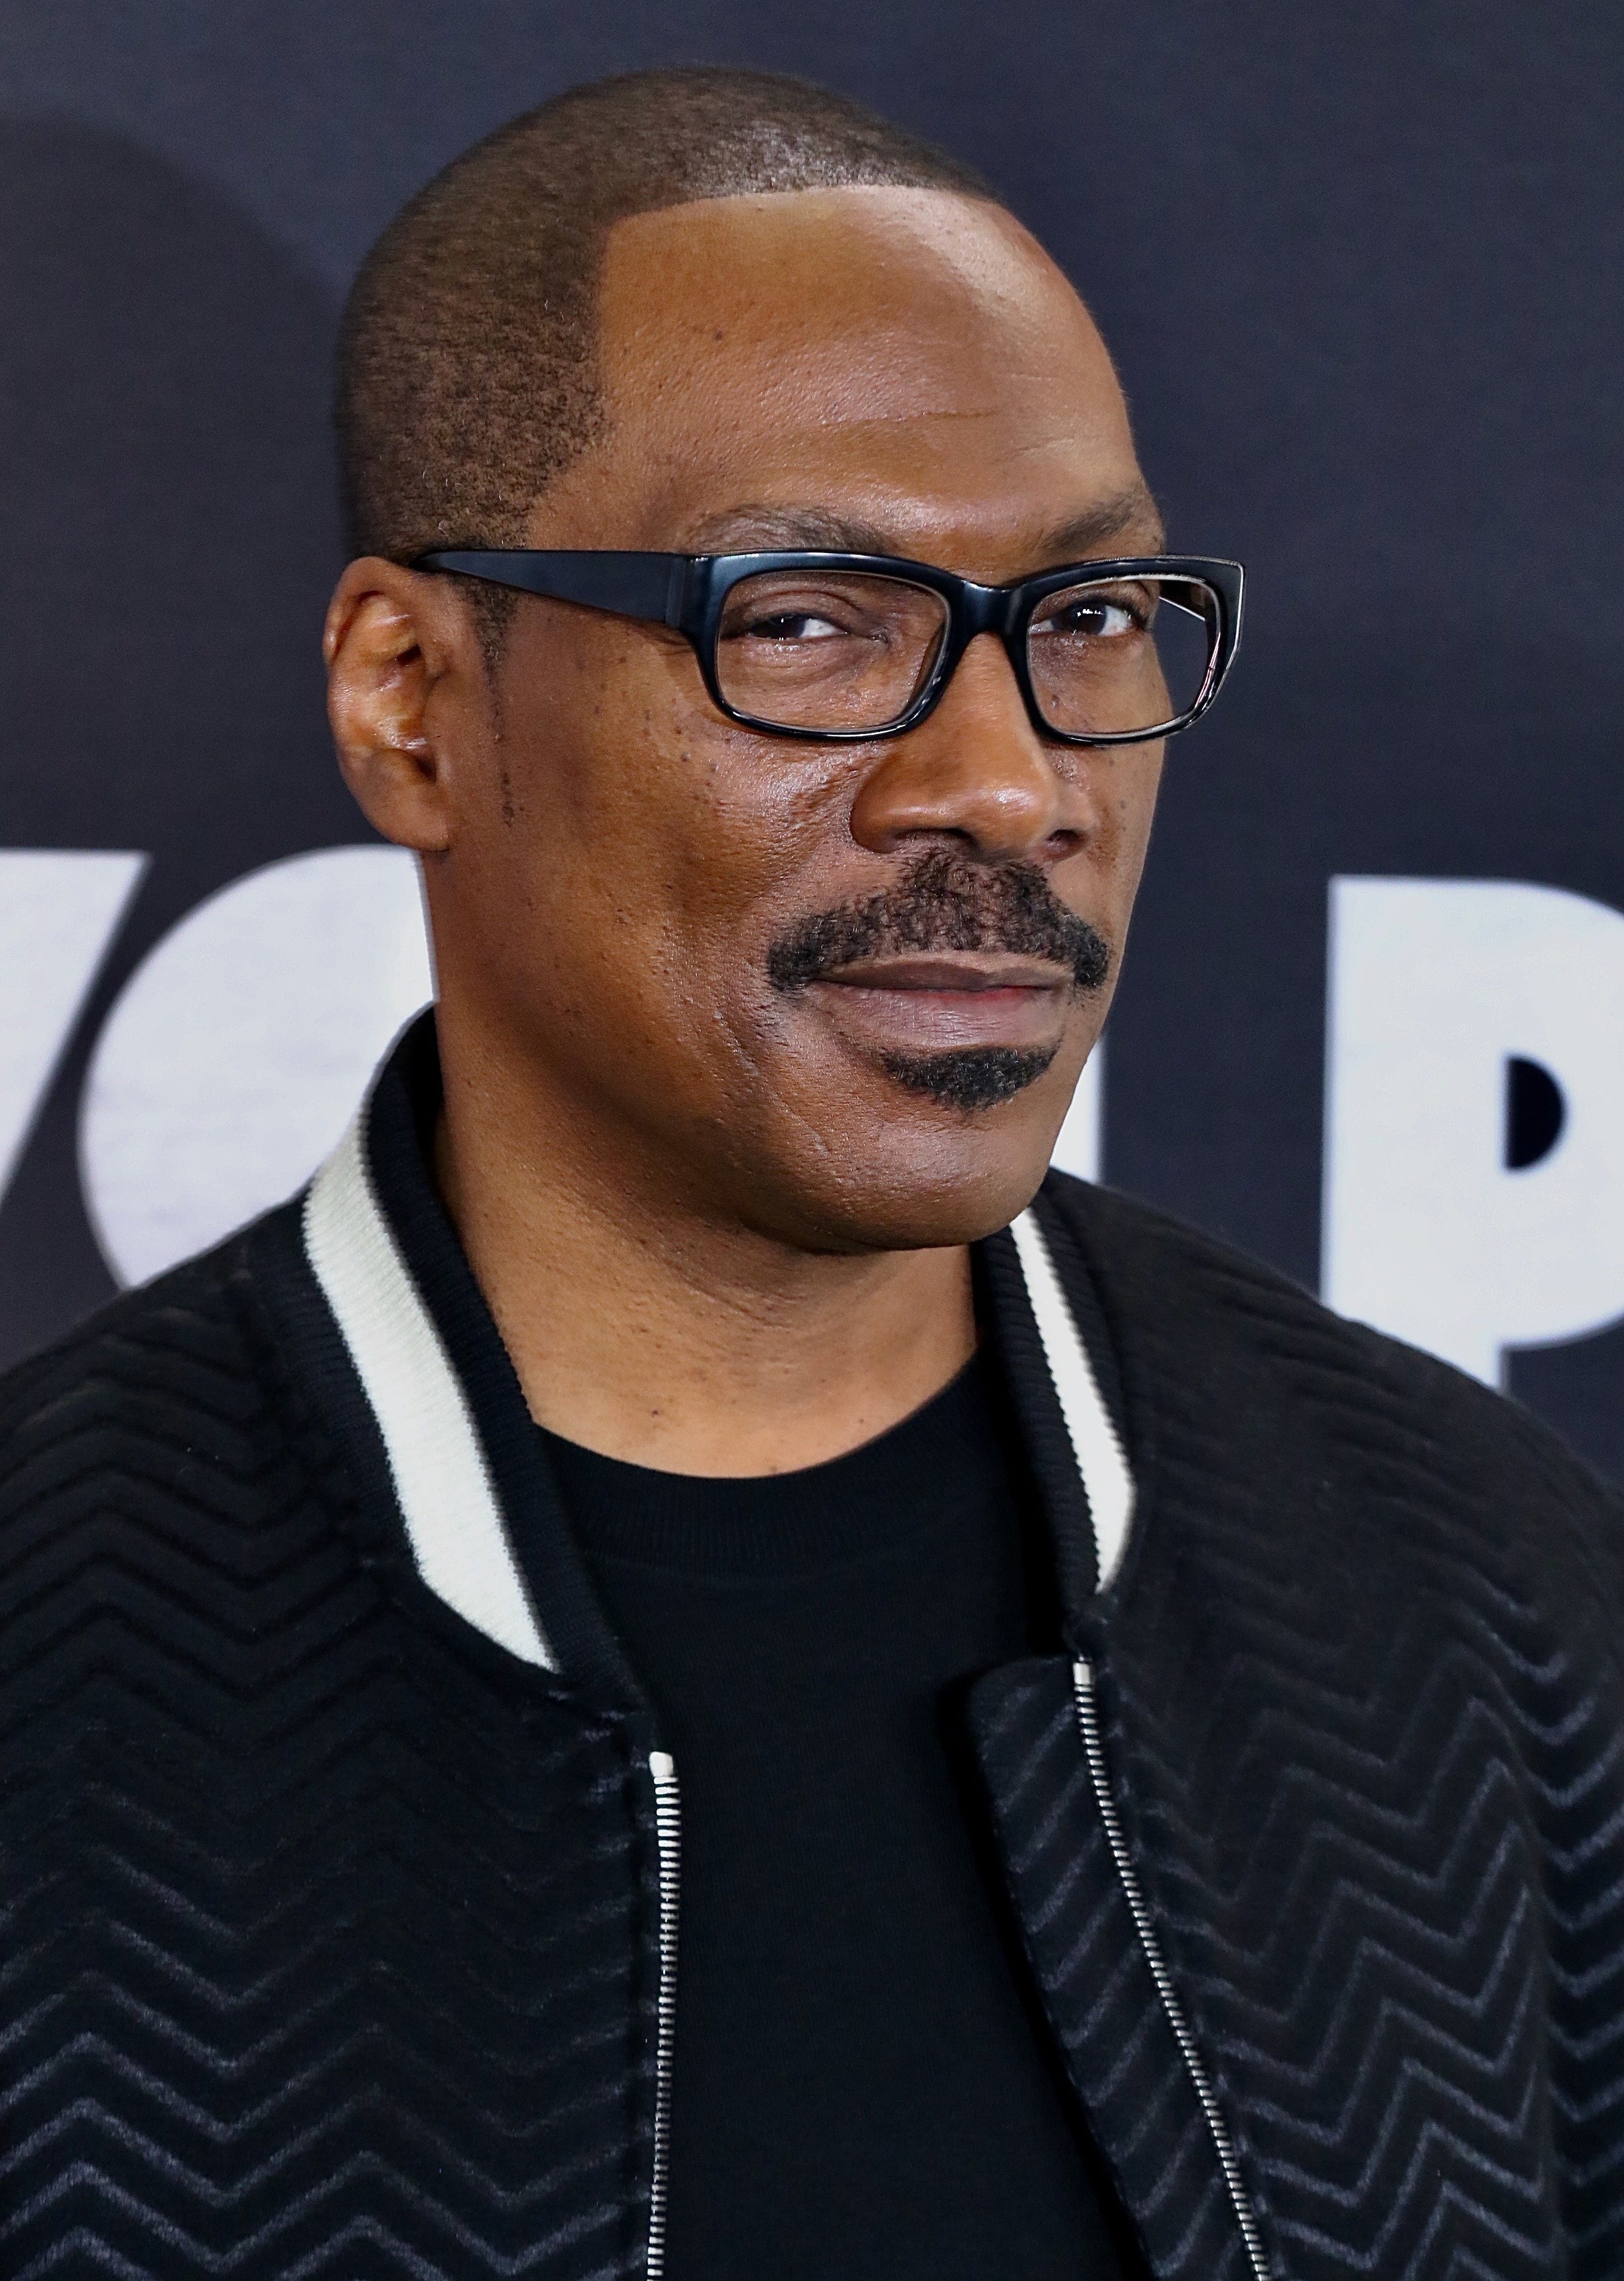 Eddie Murphy at the premiere of You People